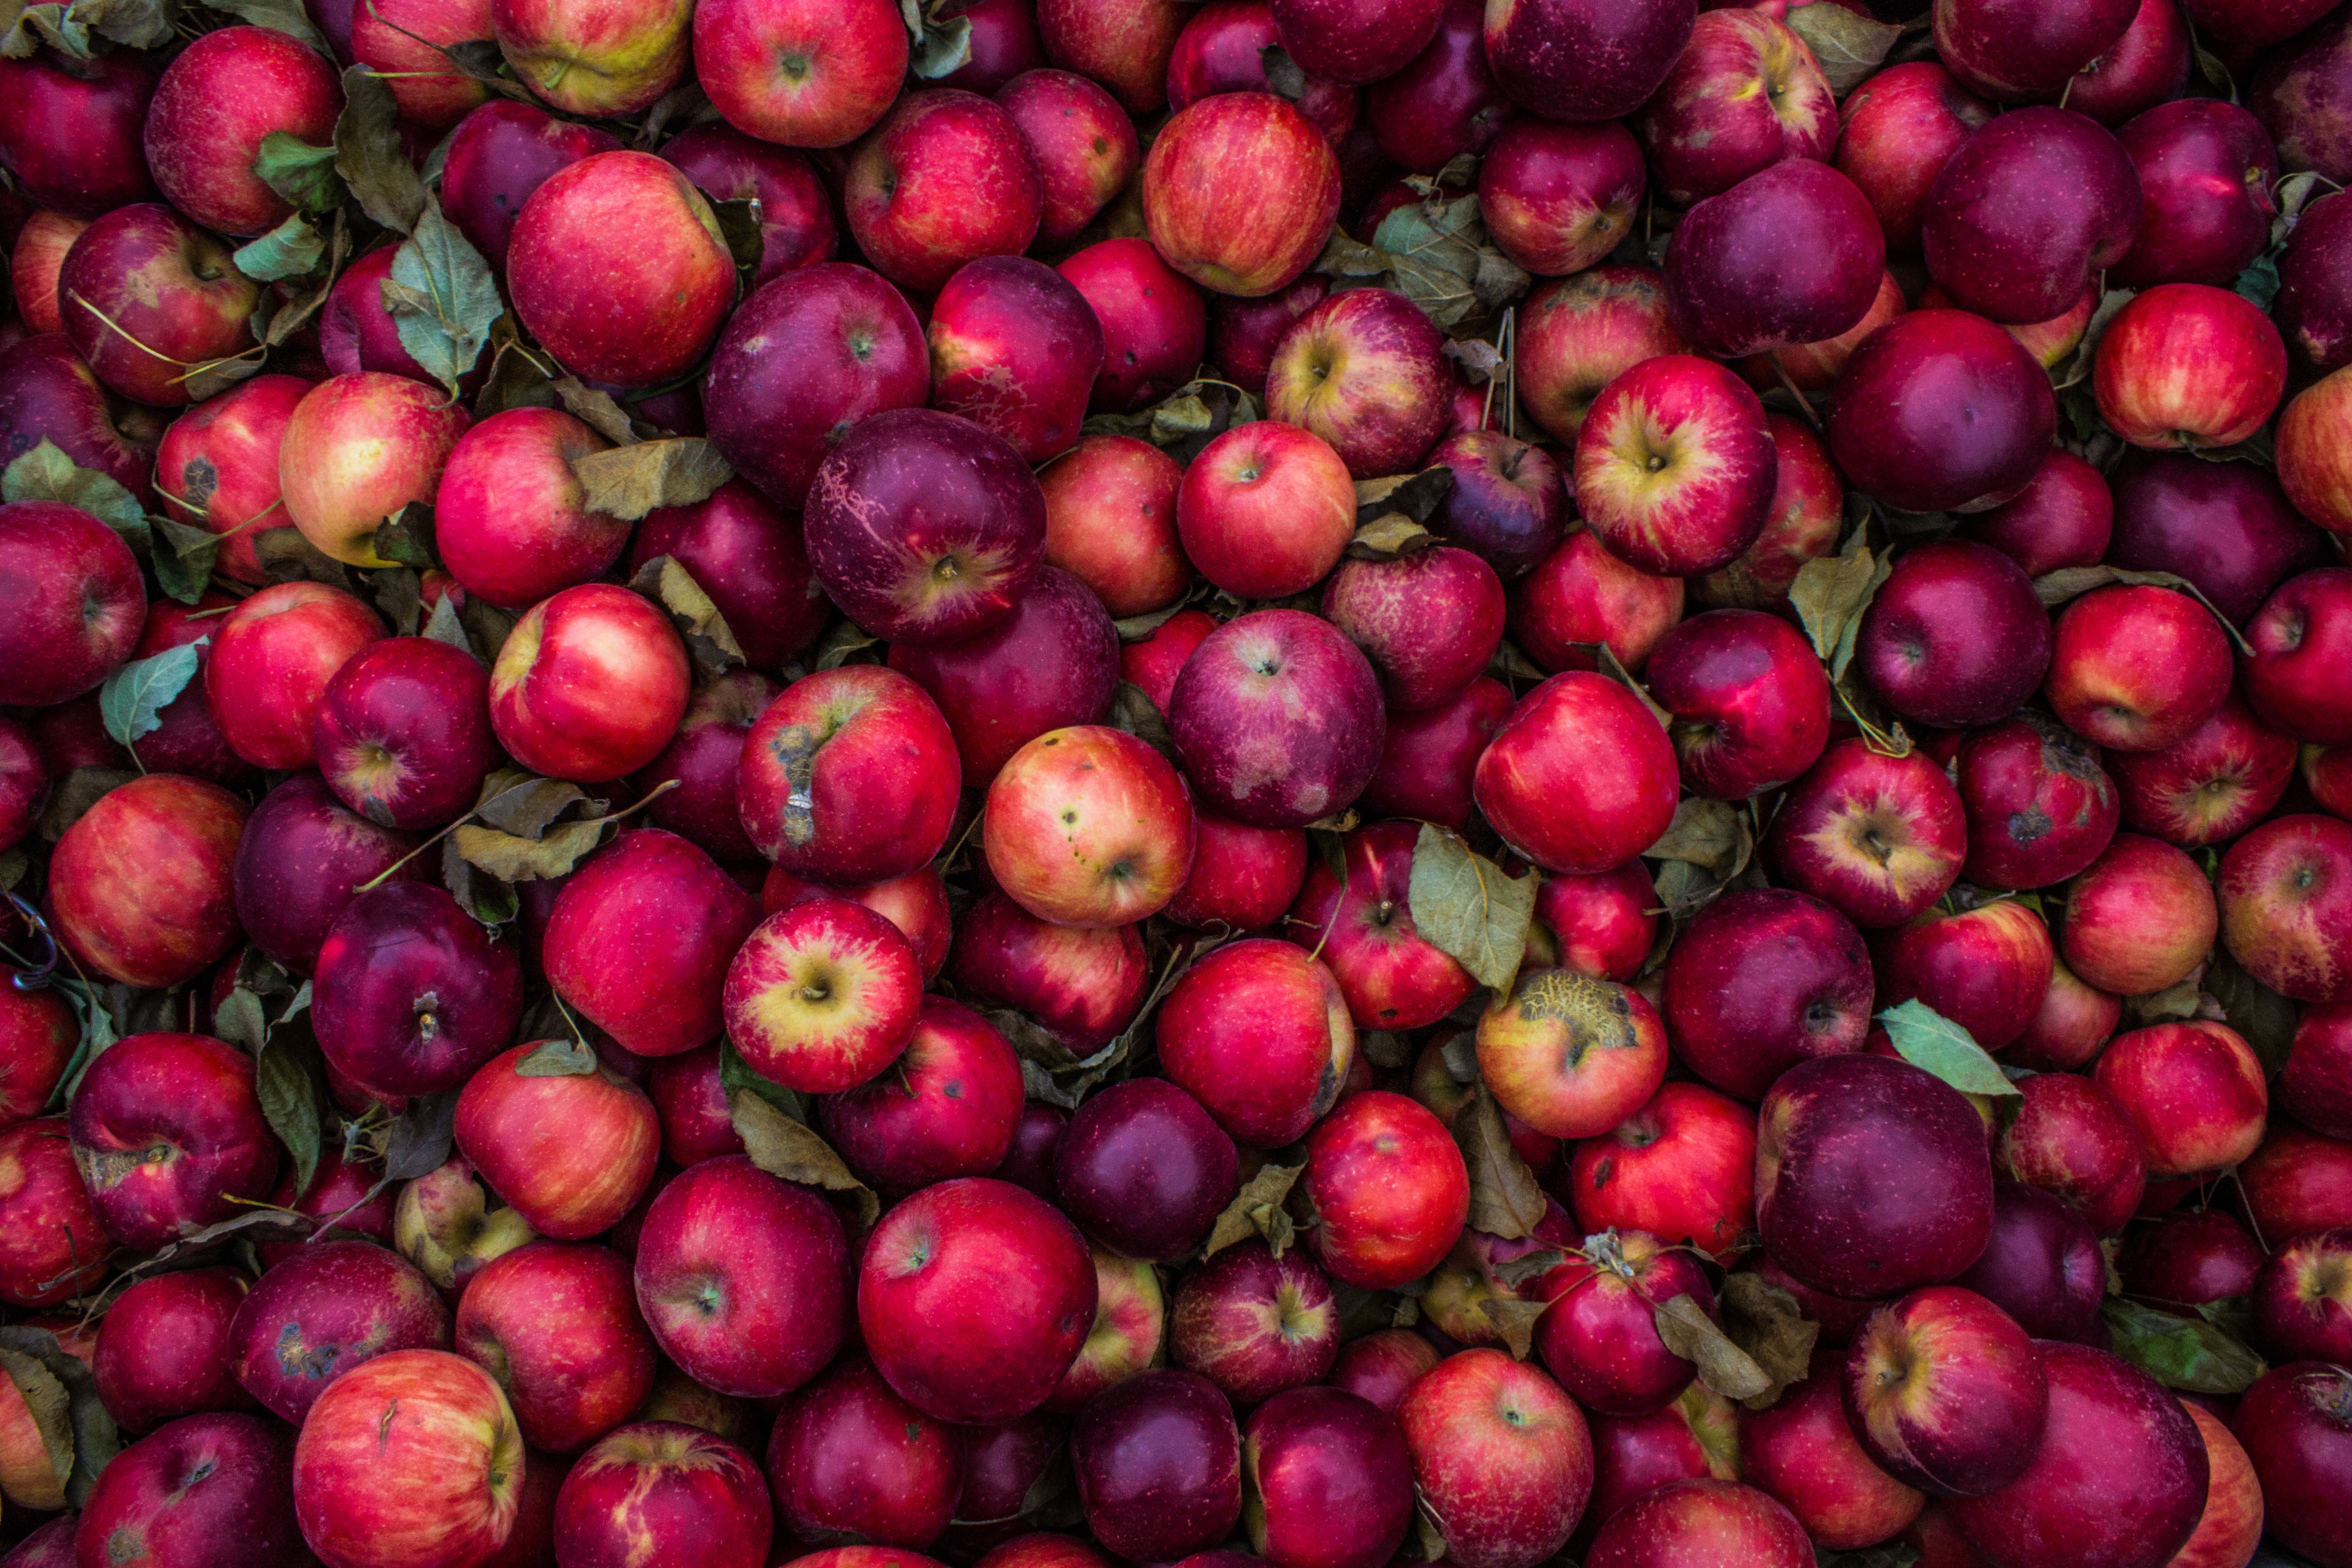 A large pile of plucked red apples.